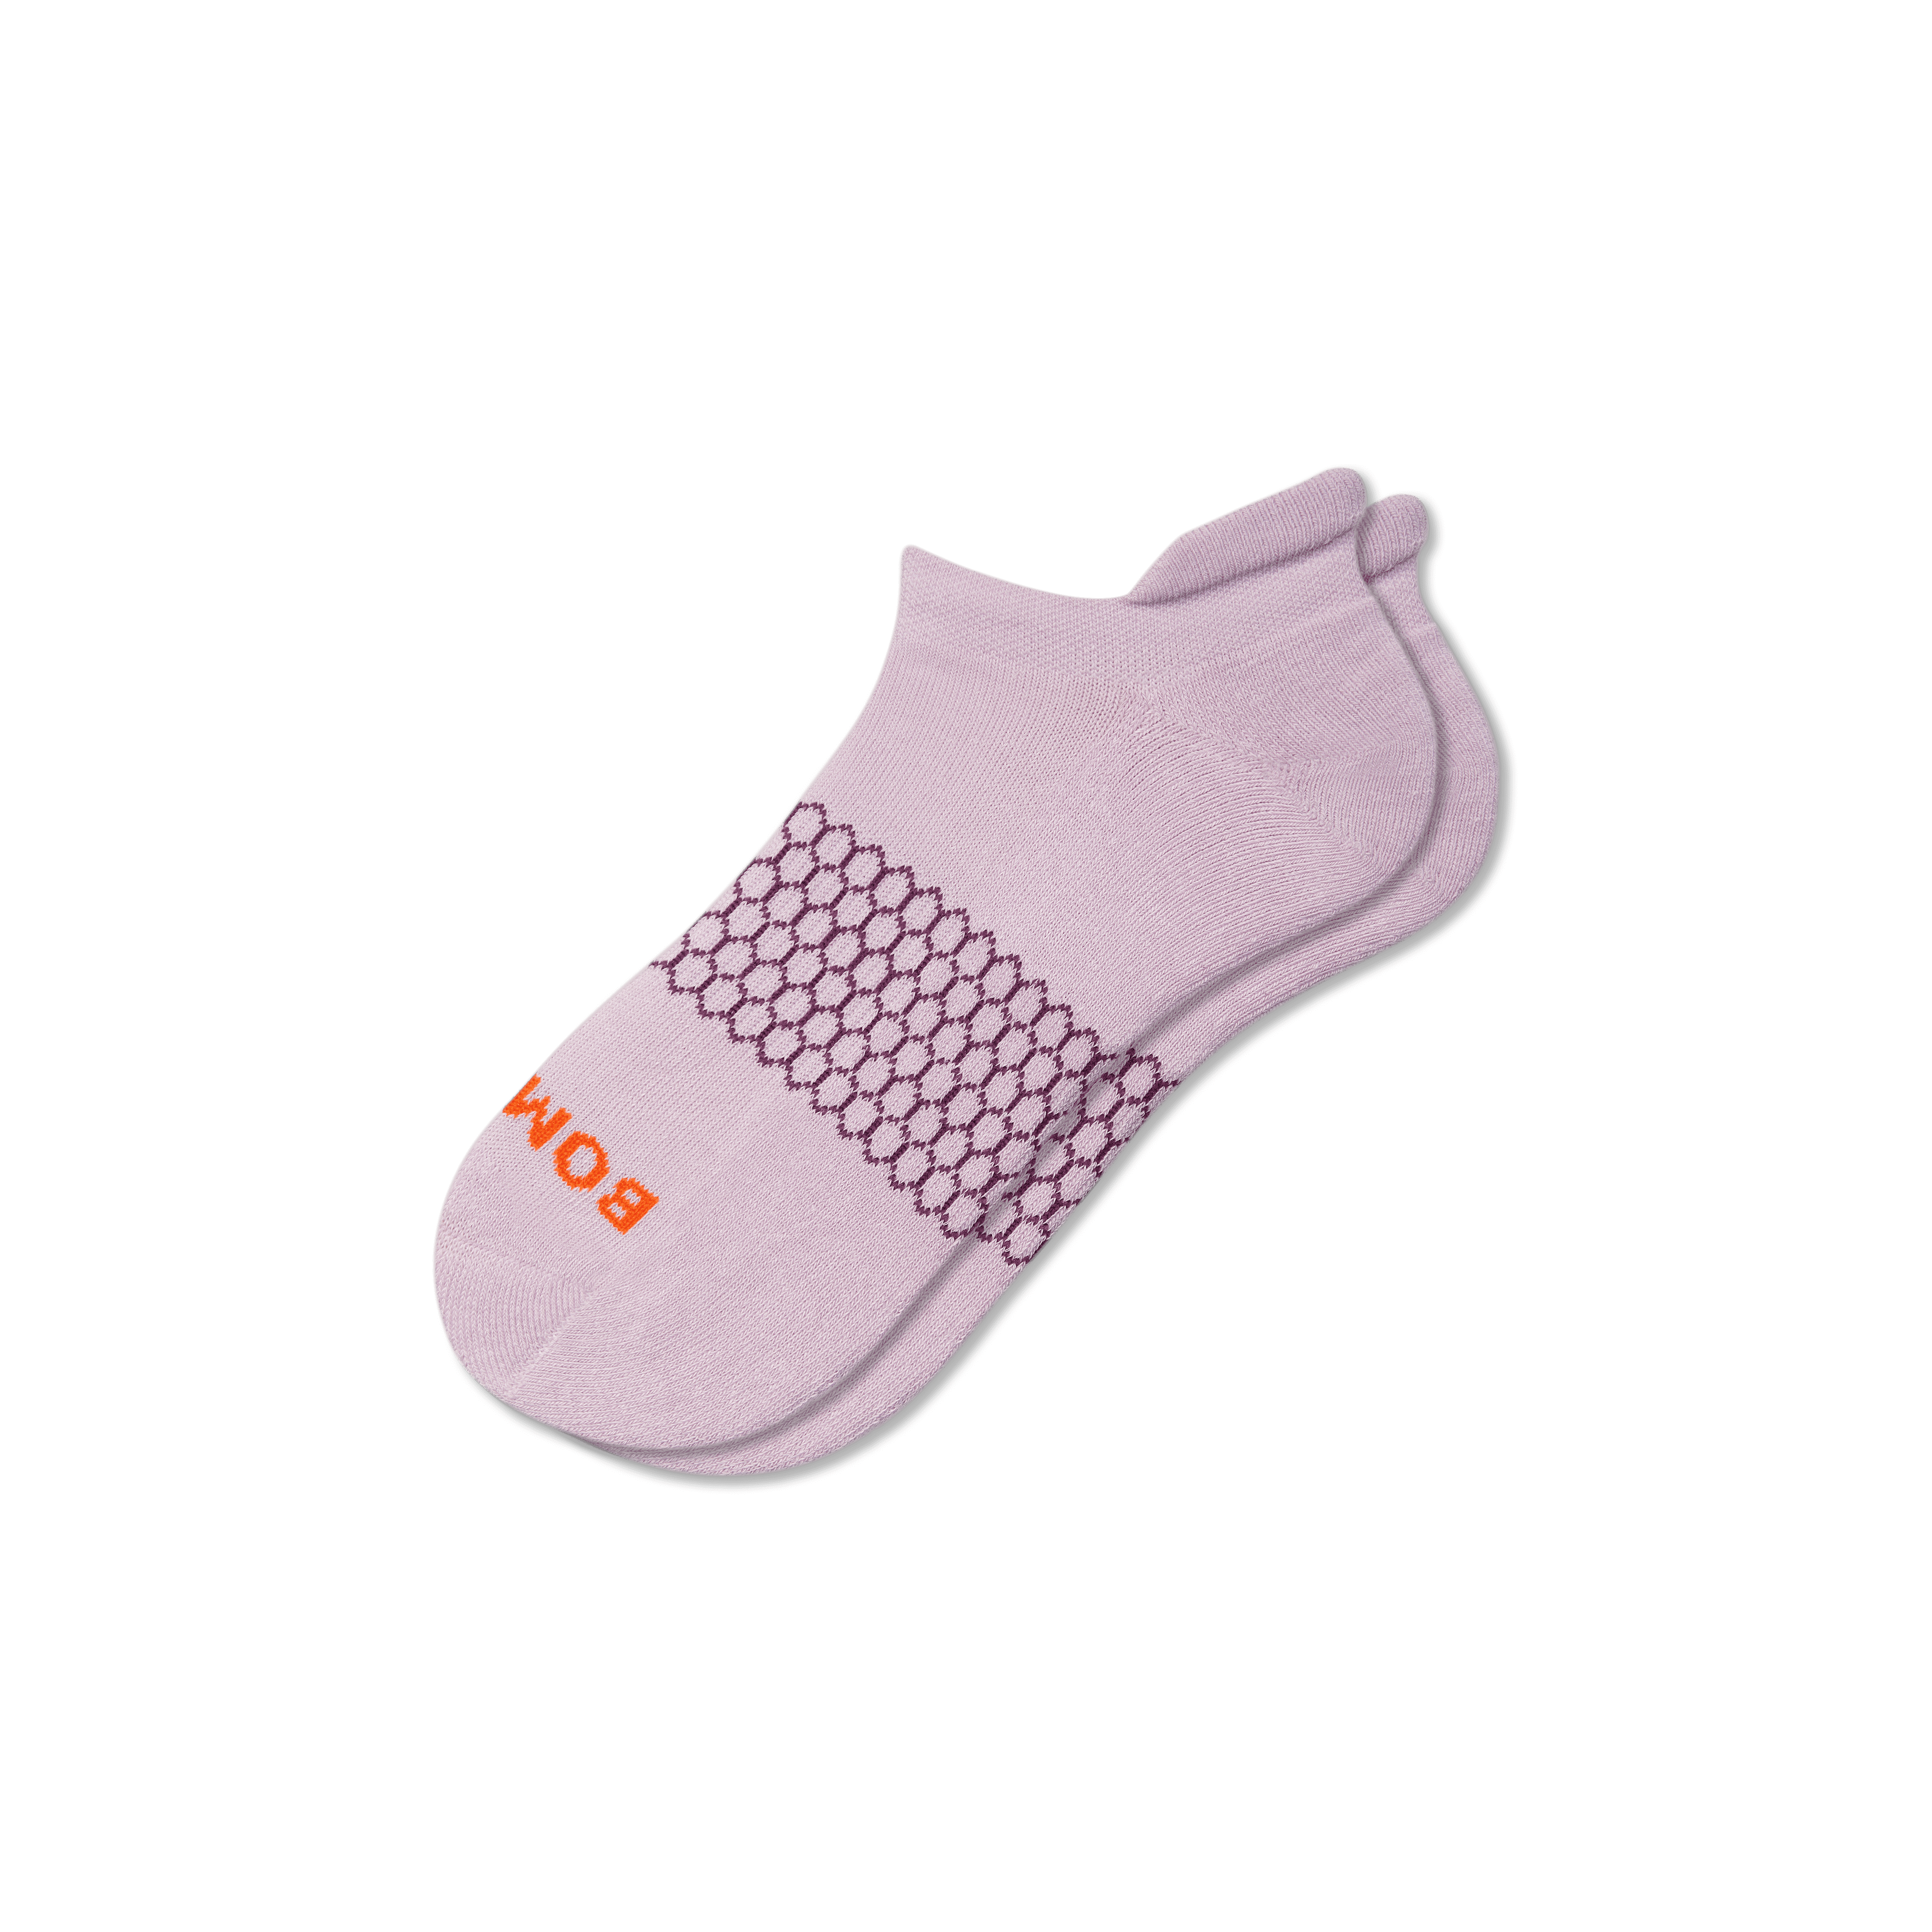 Bombas Solids Ankle Socks In Washed Lavender